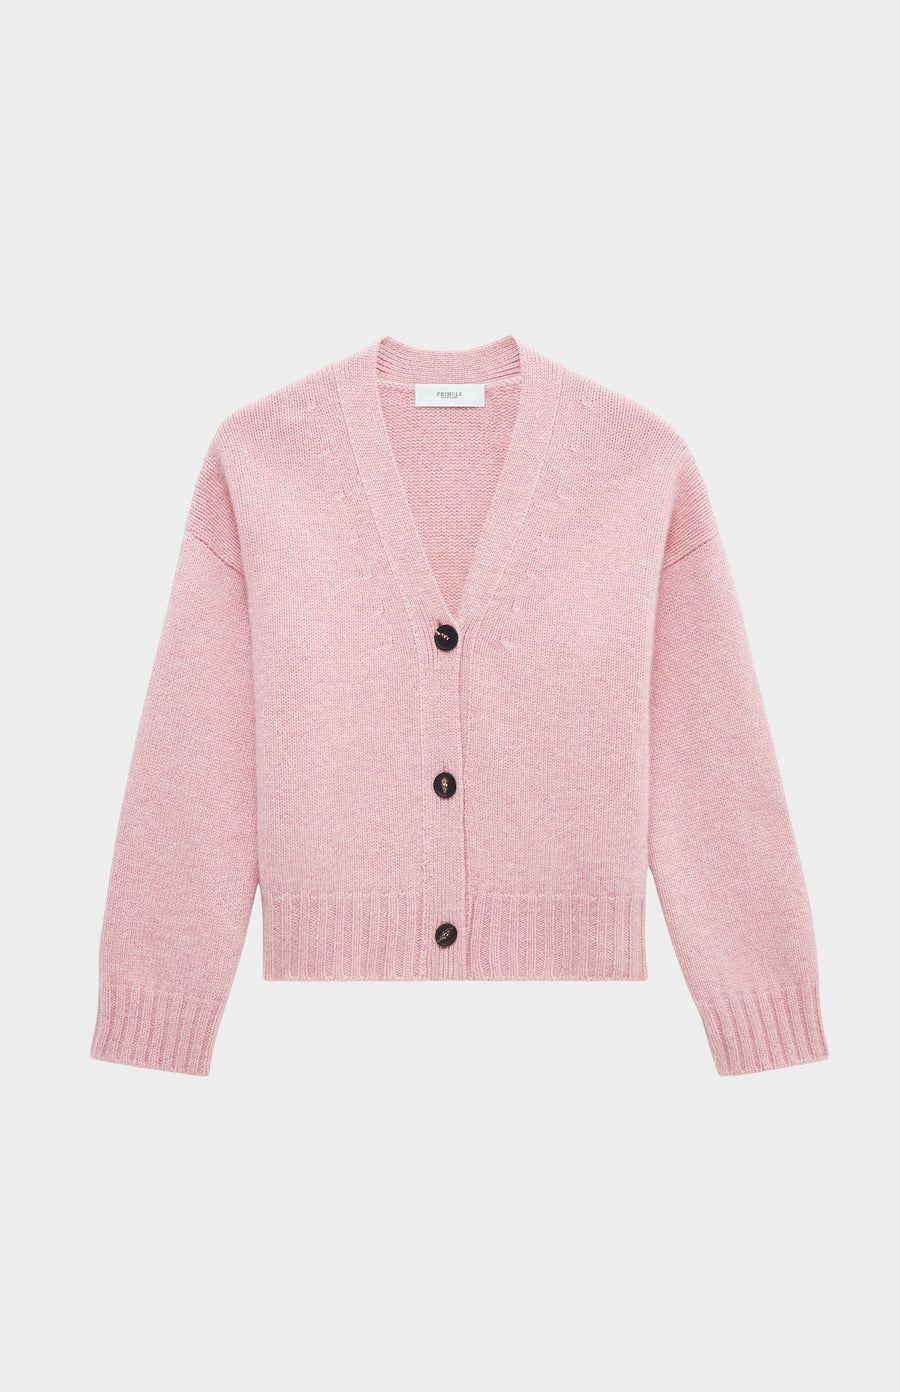 Pringle of Scotland Women's Cropped Cosy Cashmere Cardigan In Dusty Pink